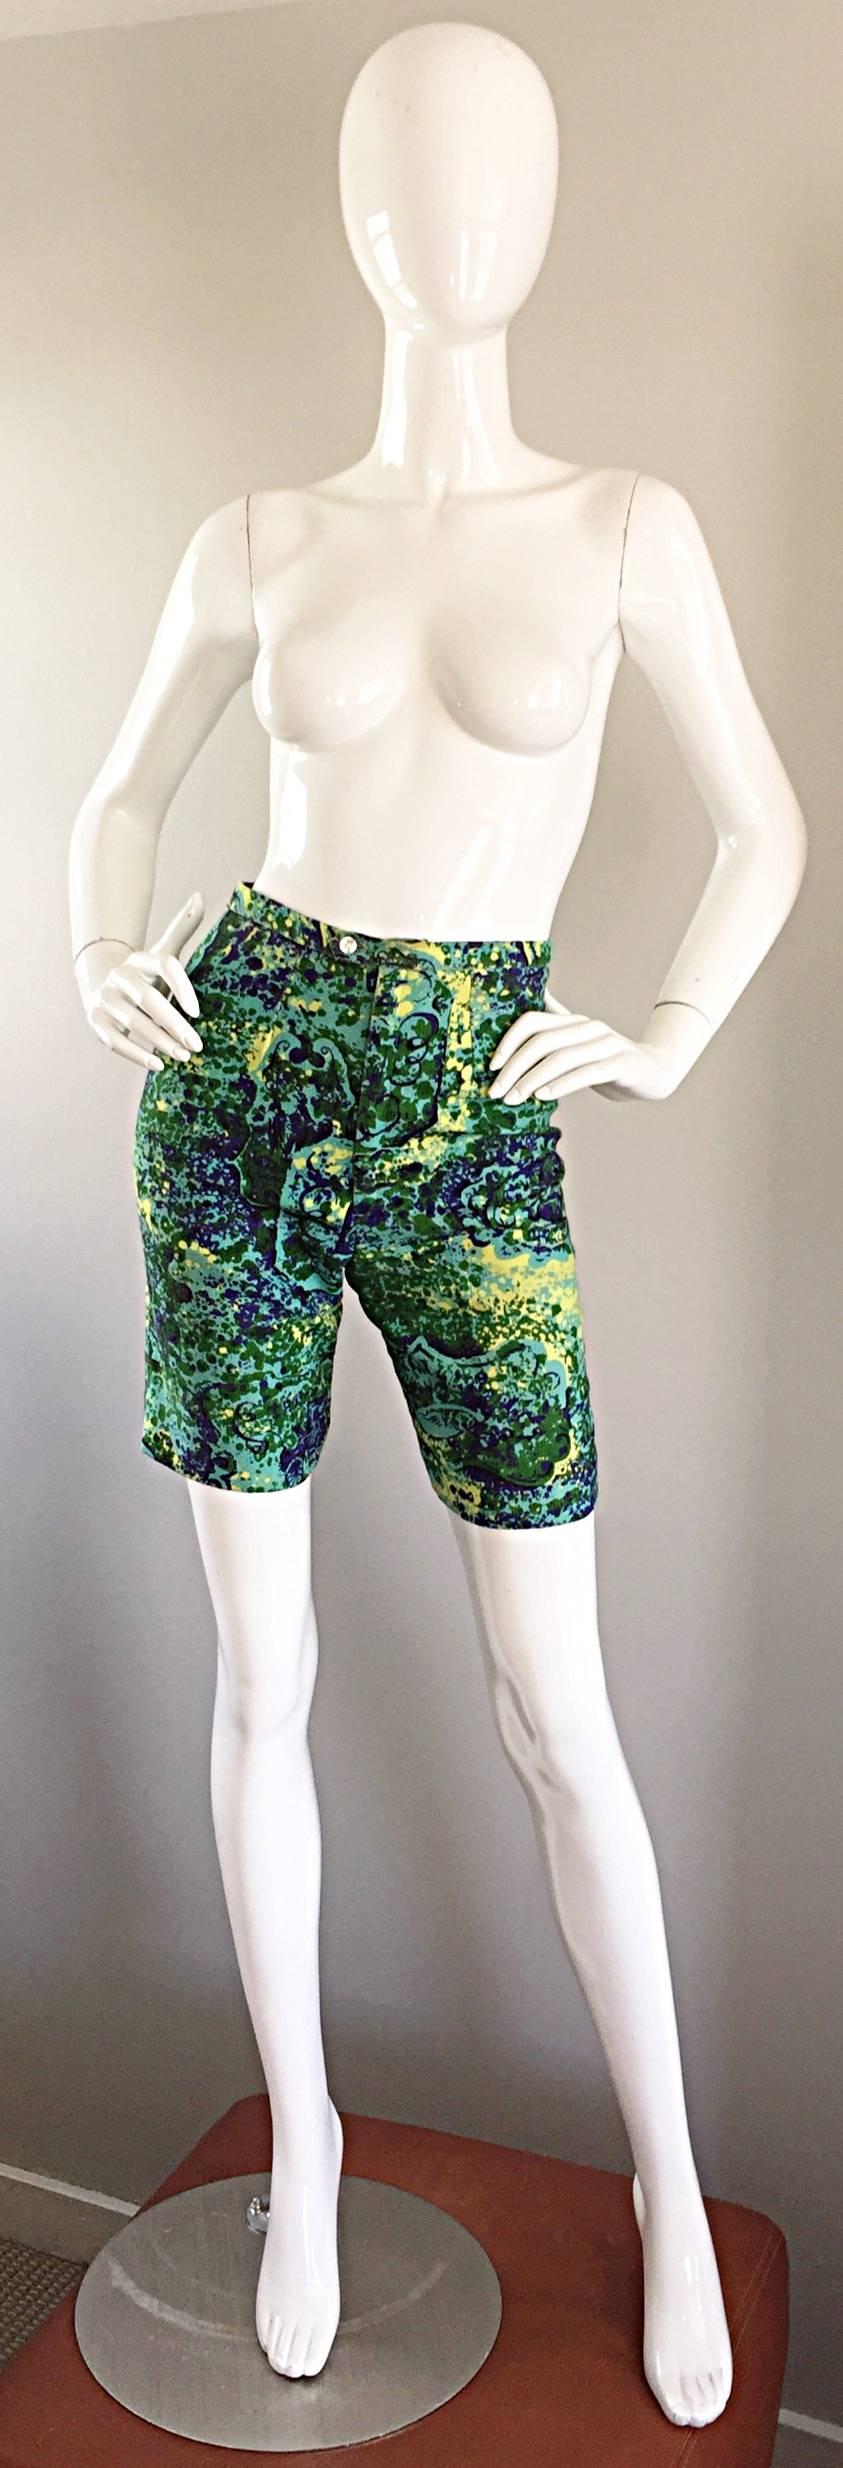 Rare vintage 1960s Women’s shorts by hard to find label MR. PANTS for JOSEPH MAGNIN! Super flattering fit, with a mod / retro silhouette. Blue, green, and yellow watercolor print throughout. Zipper fly, with both interior and exterior button at